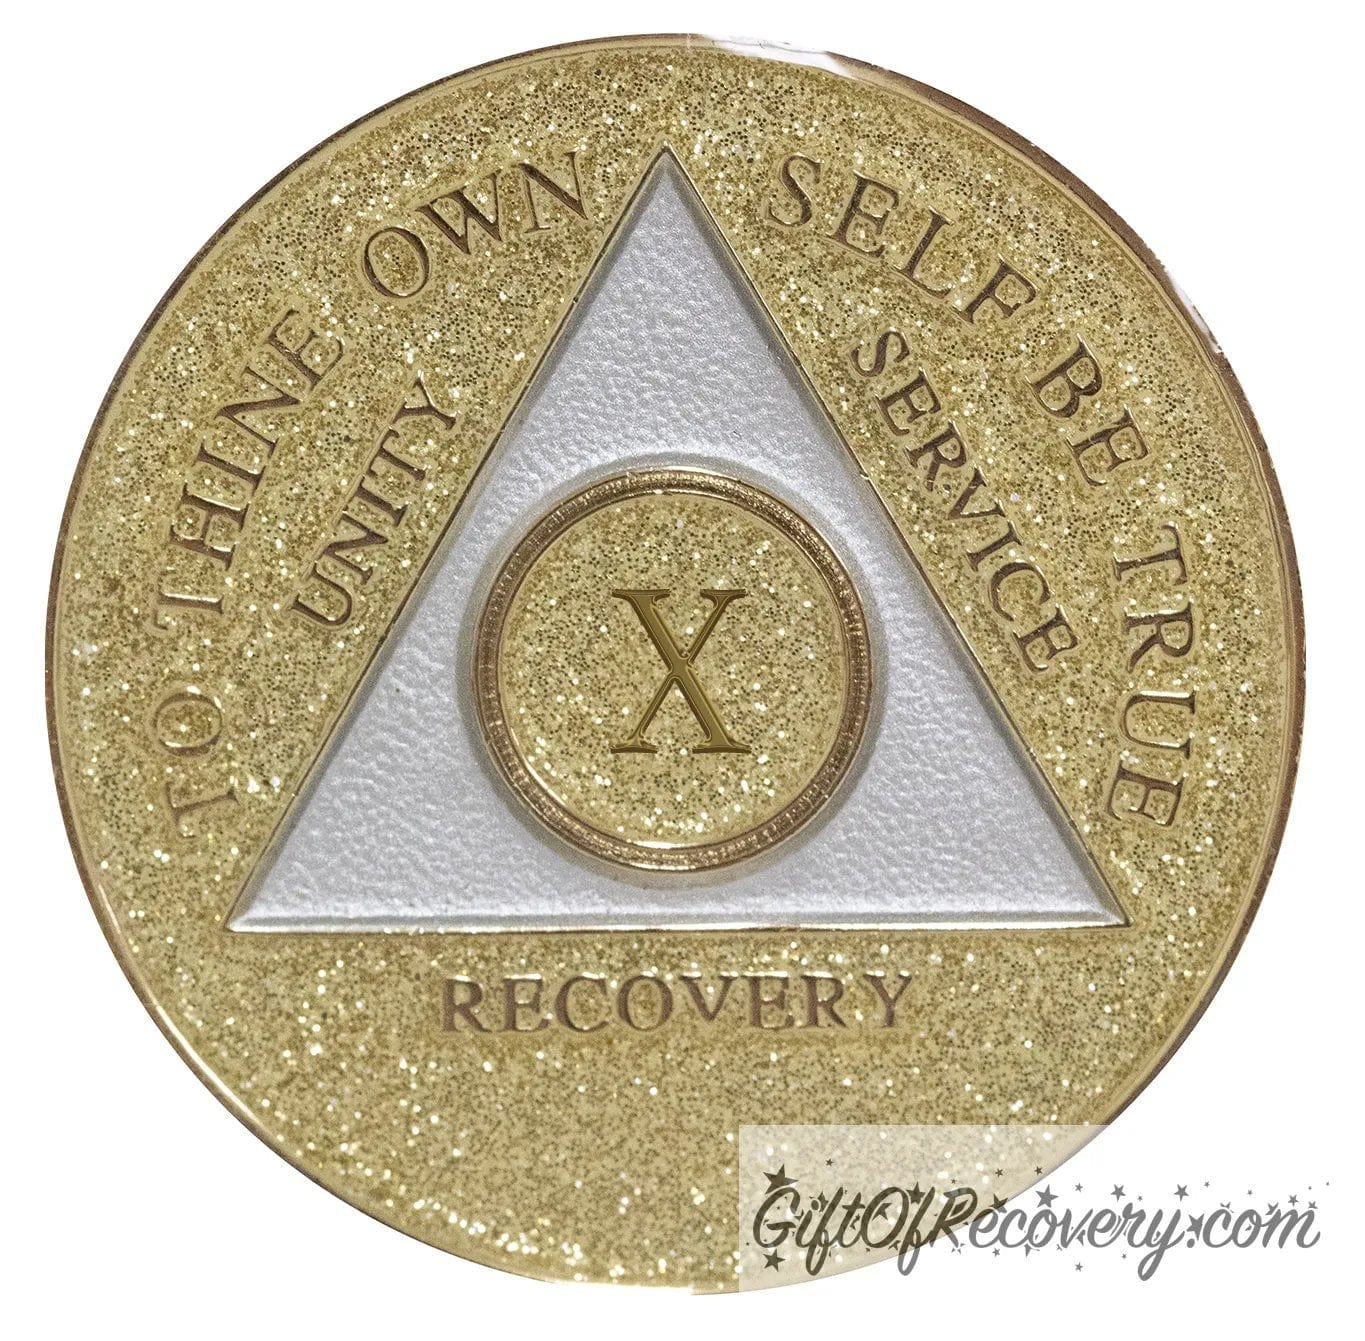 10 year AA medallion Gold glitter, with the triangle pearl white and to thine own self be true, unity, service, recovery, and the roman numeral embossed with 14k gold-plated brass, the recovery medallion is sealed with resin for a shiny finish that will last and is scratch proof.